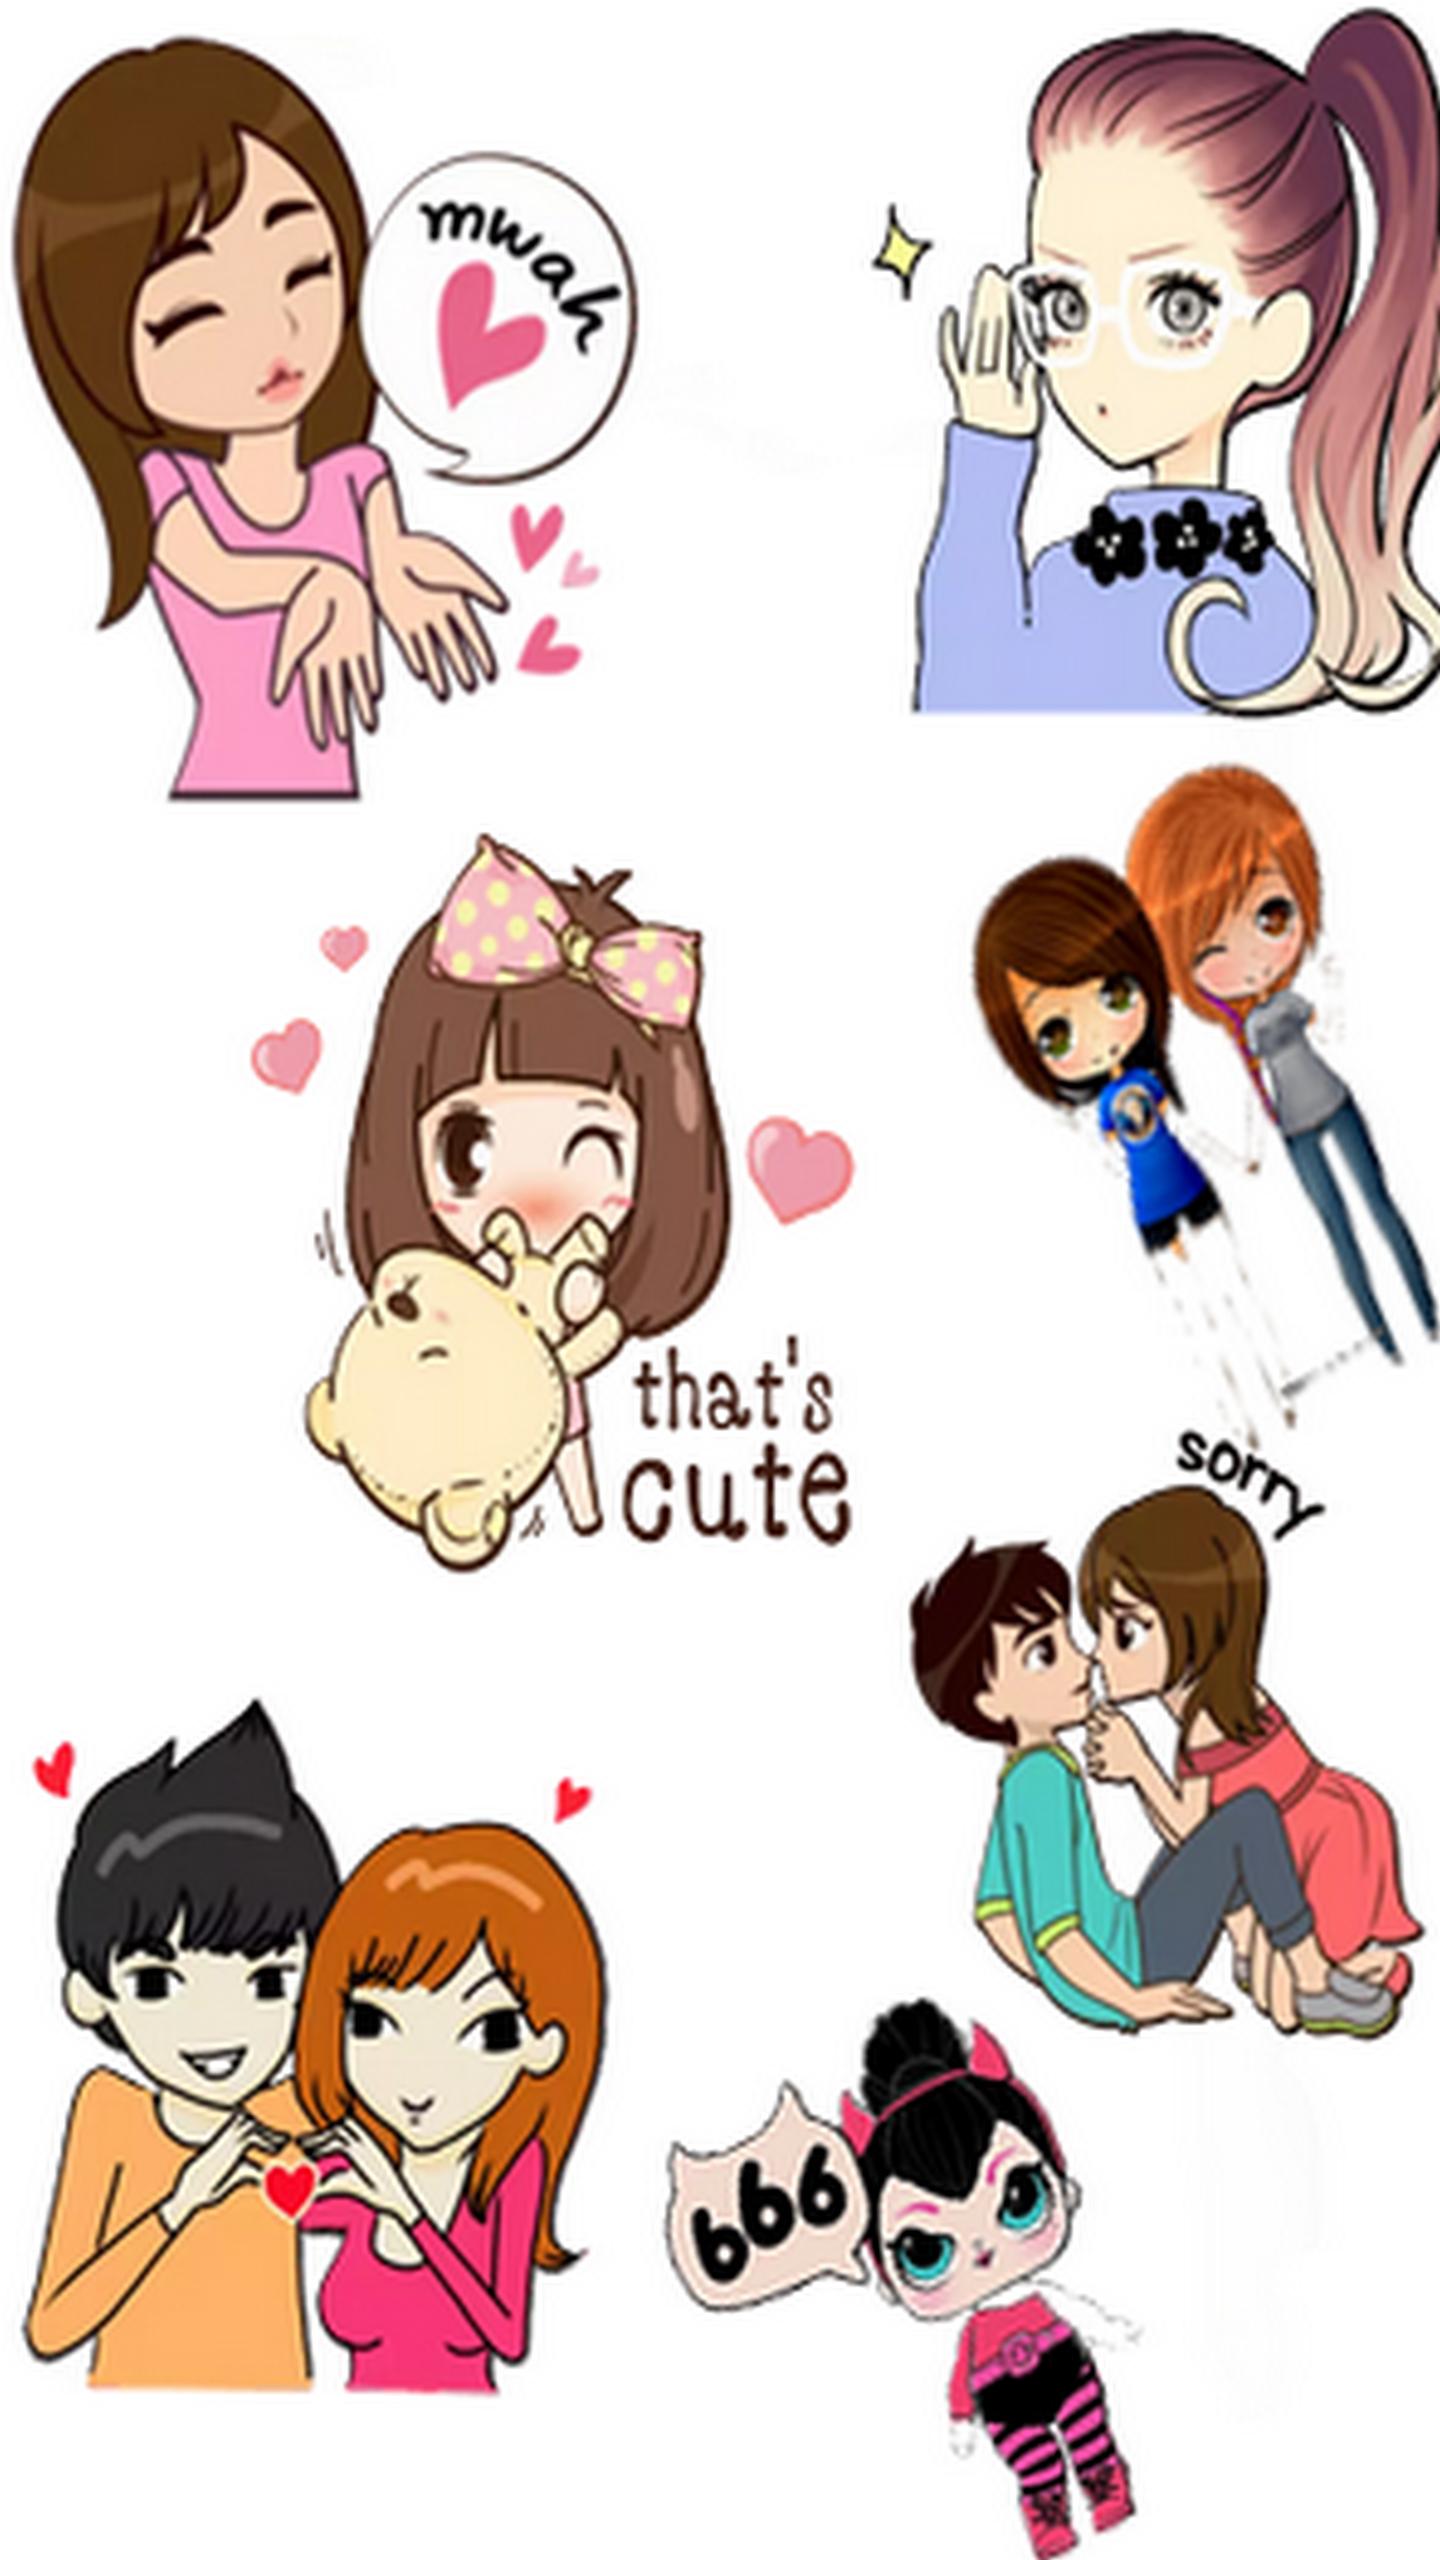 Anime Love Stickers For Whatsapp For Android Apk Download